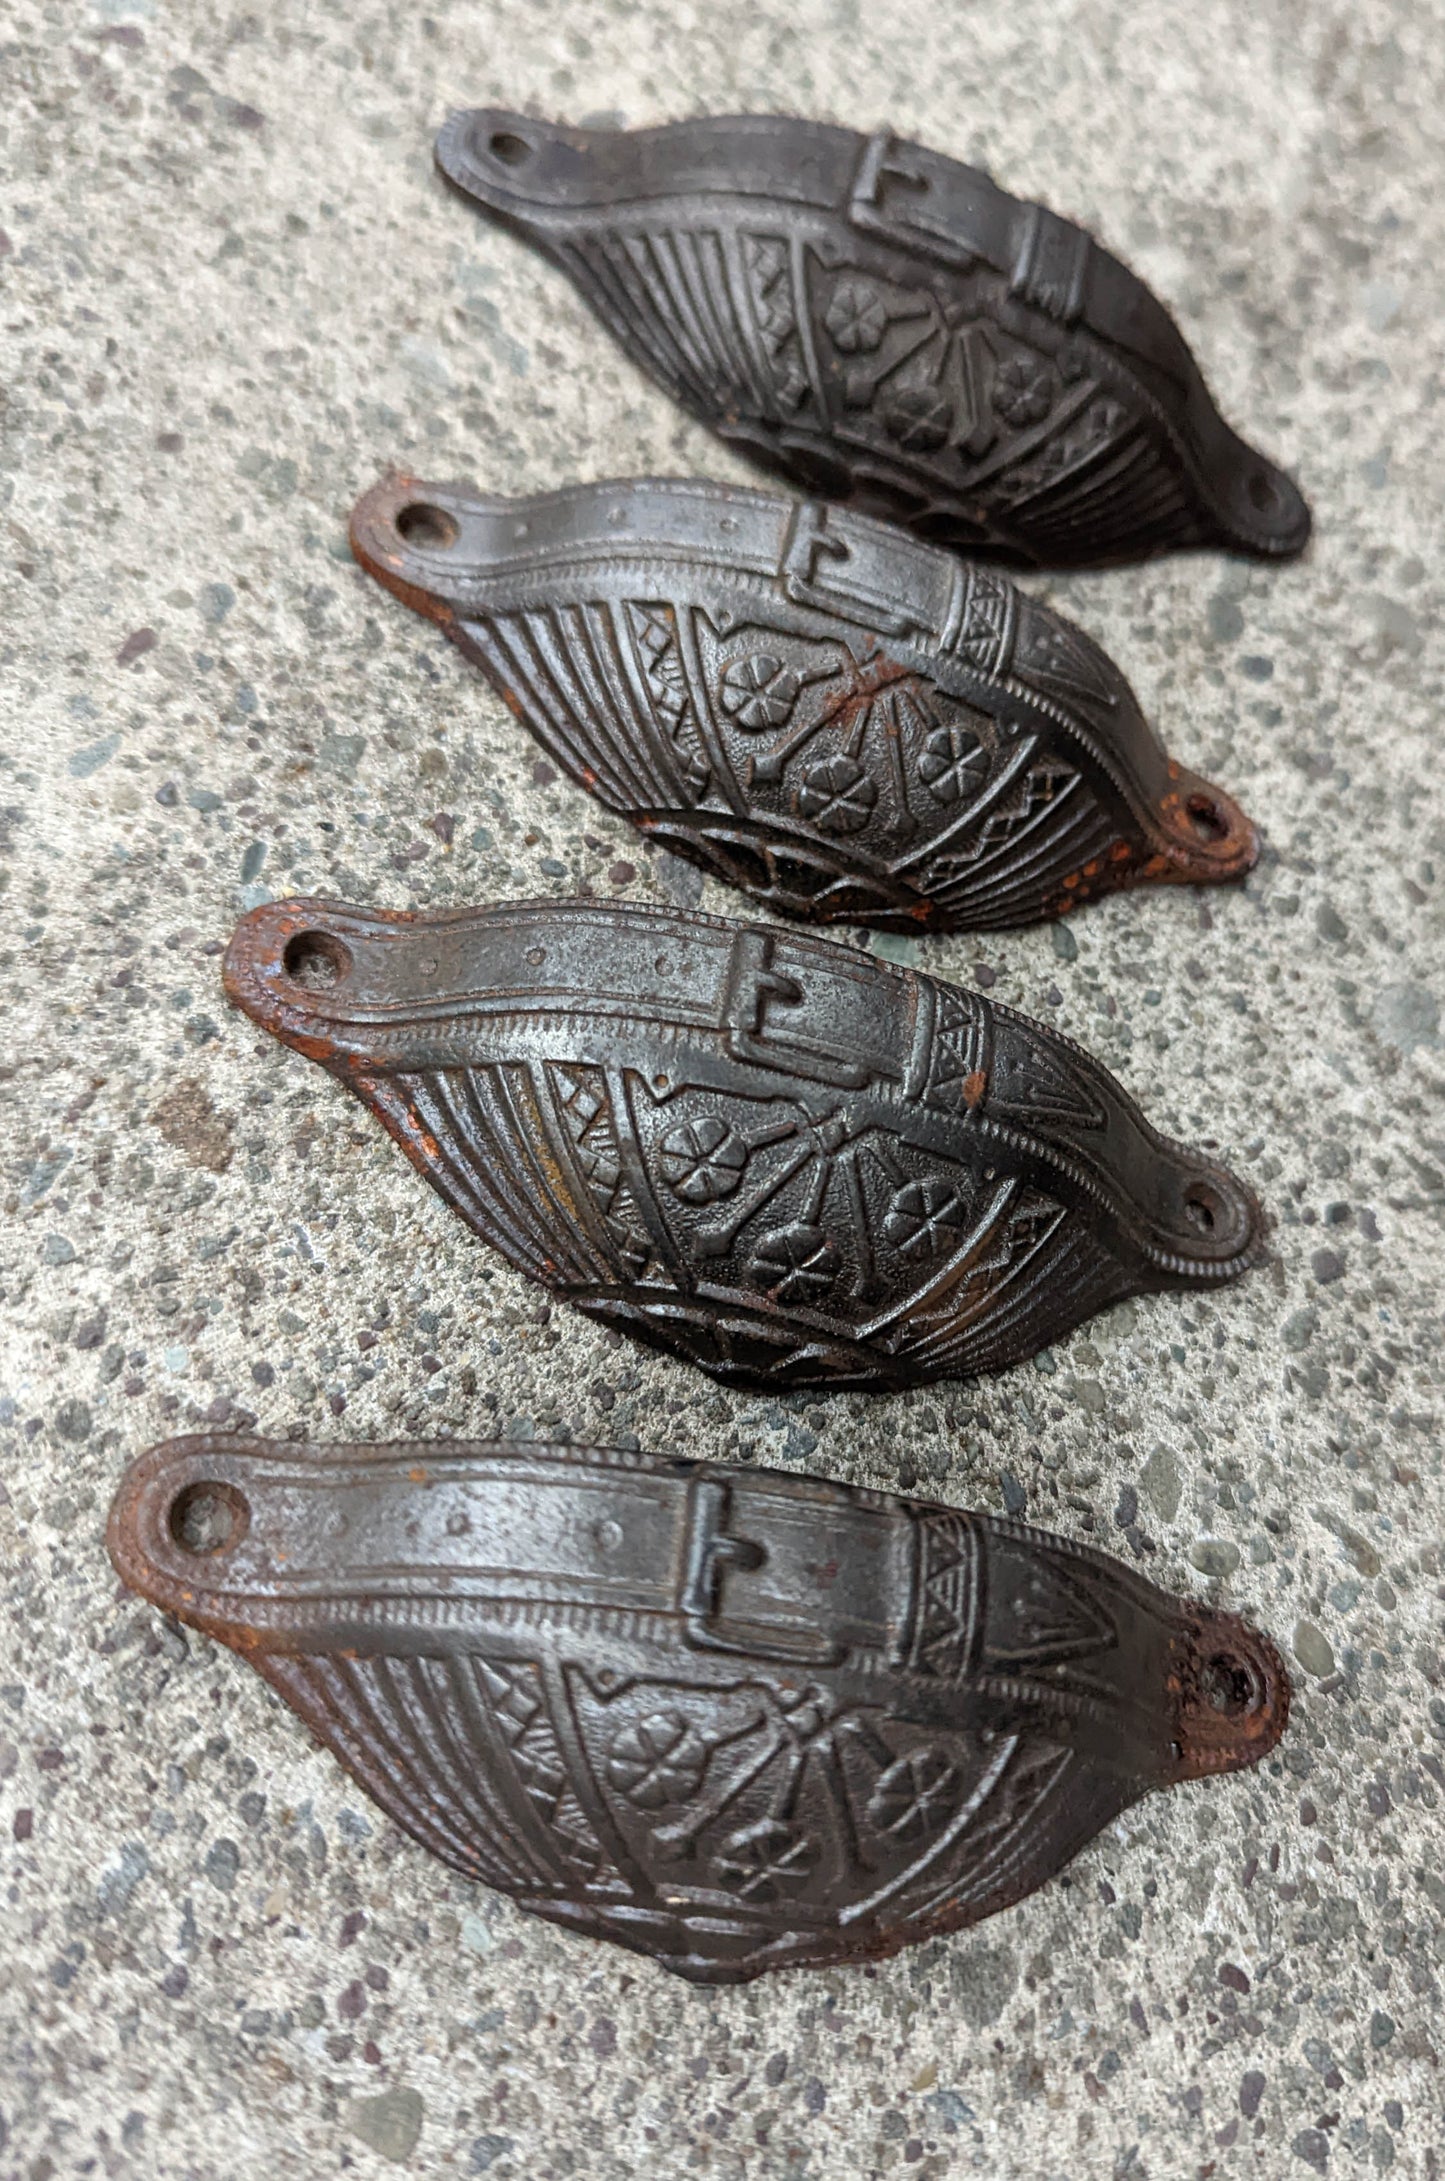 Lot of 4 Antique Vintage Old "Russell & Erwin" SOLID Cast Iron Steel Dresser Desk Drawer Bin Furniture Pull Handle Eastlake Aesthetic Victorian Style